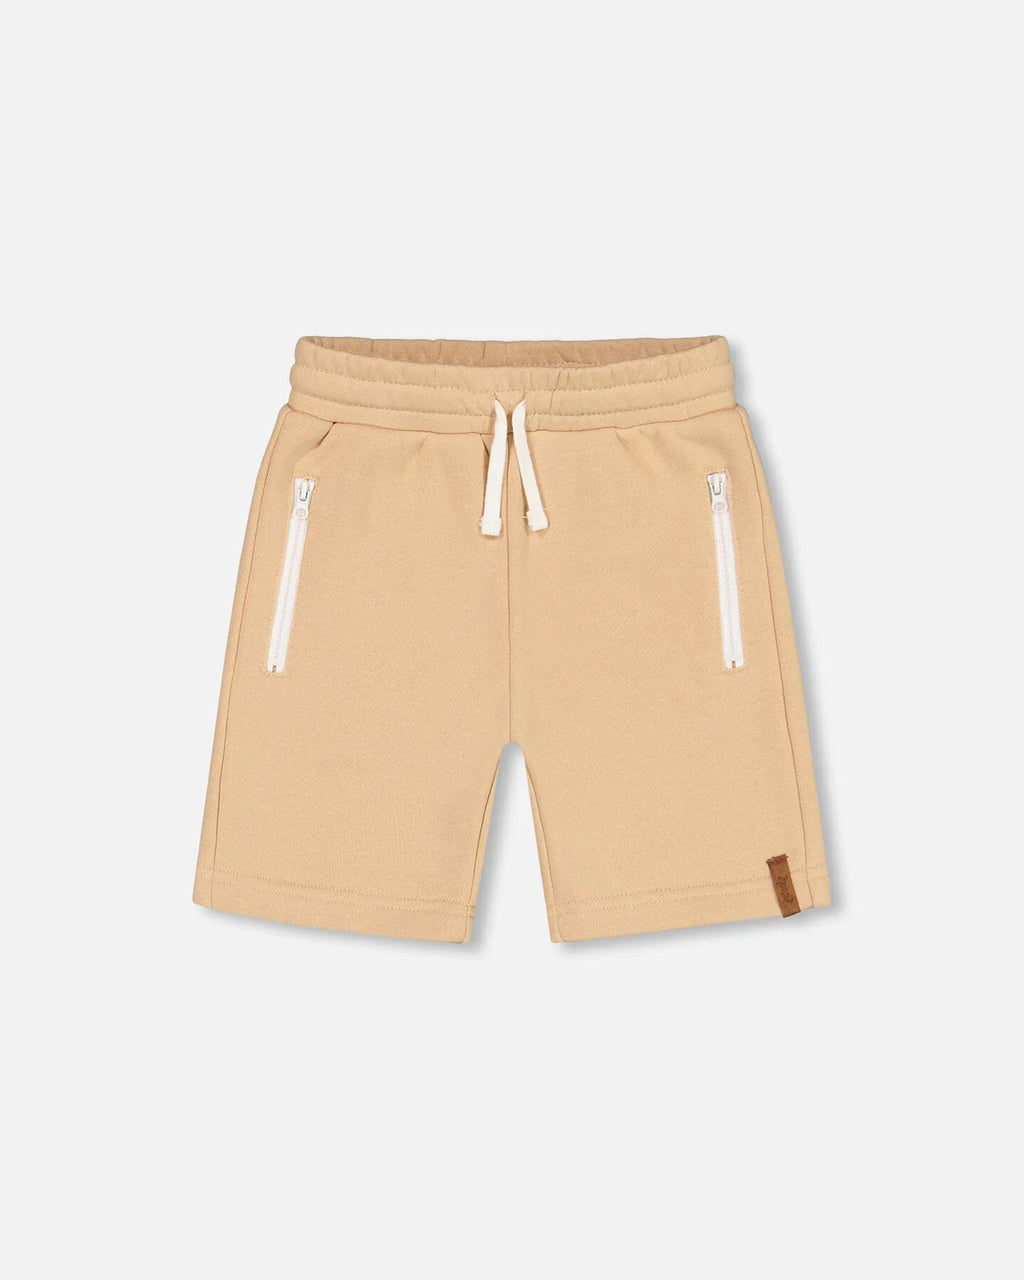 French Terry Short With Zipper Pockets Beige